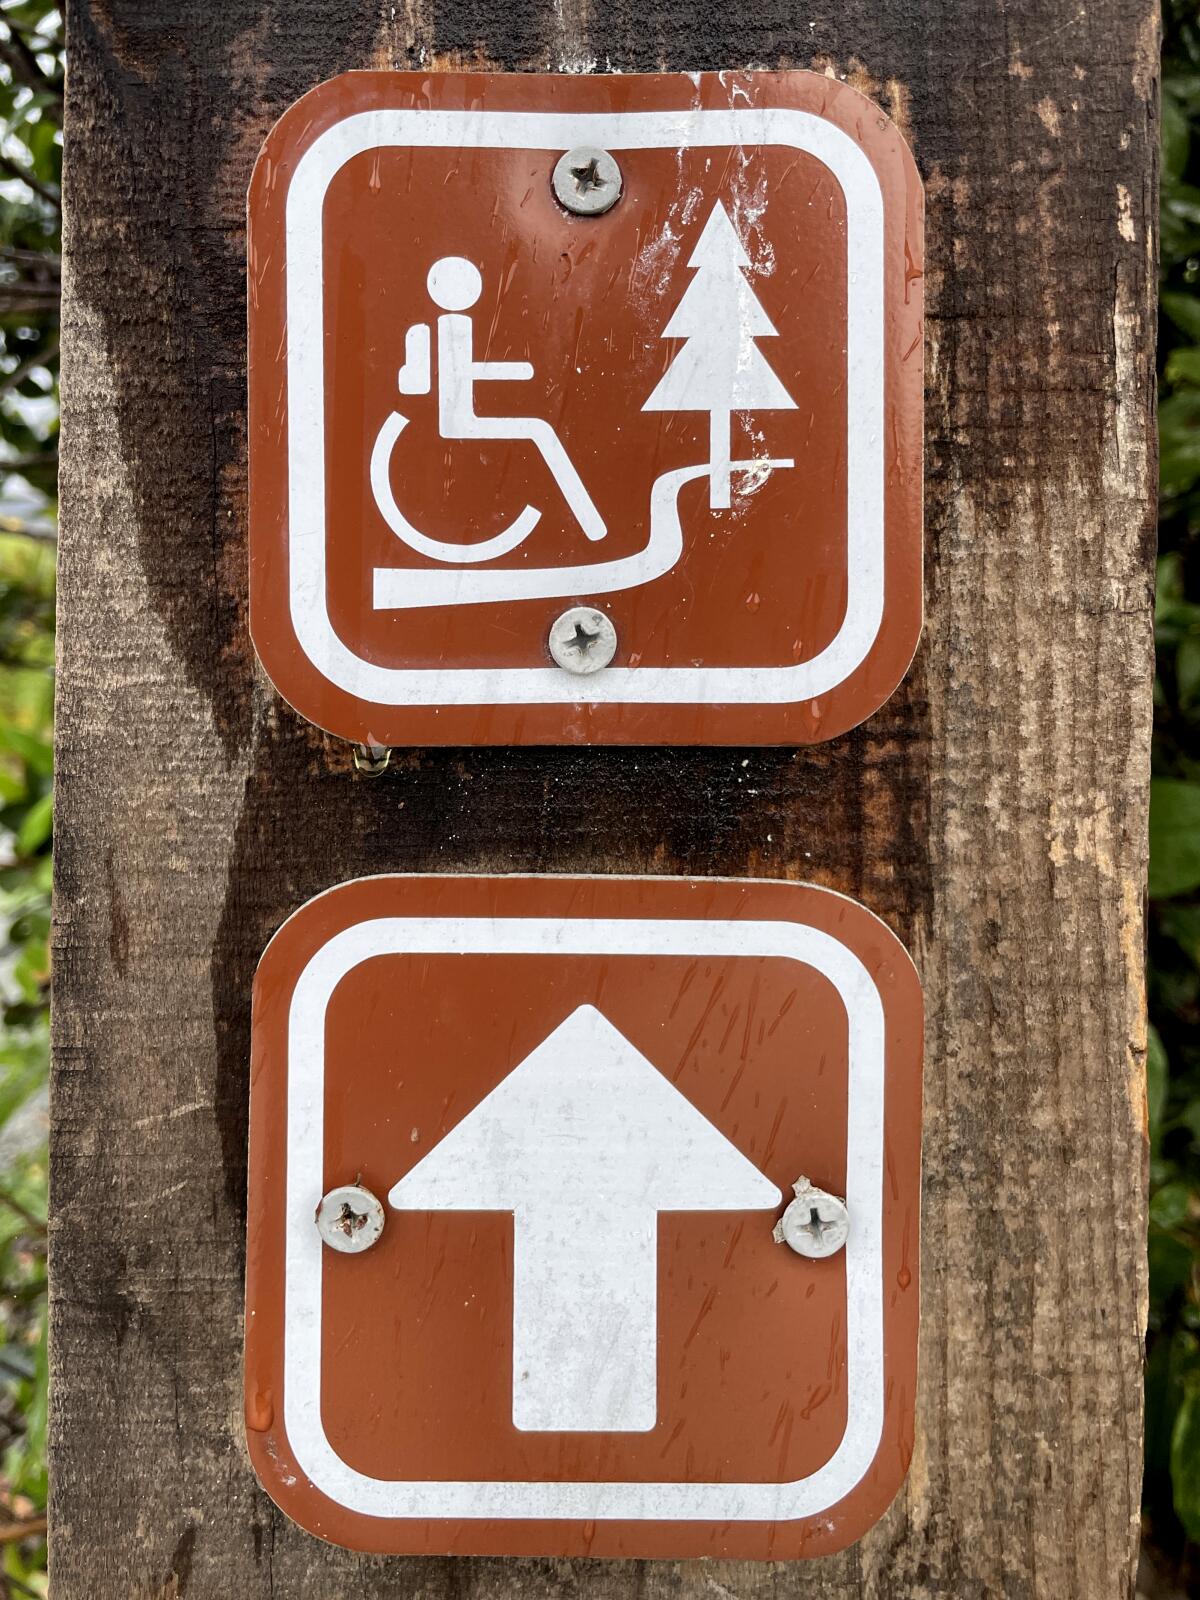 Accessible trail sign